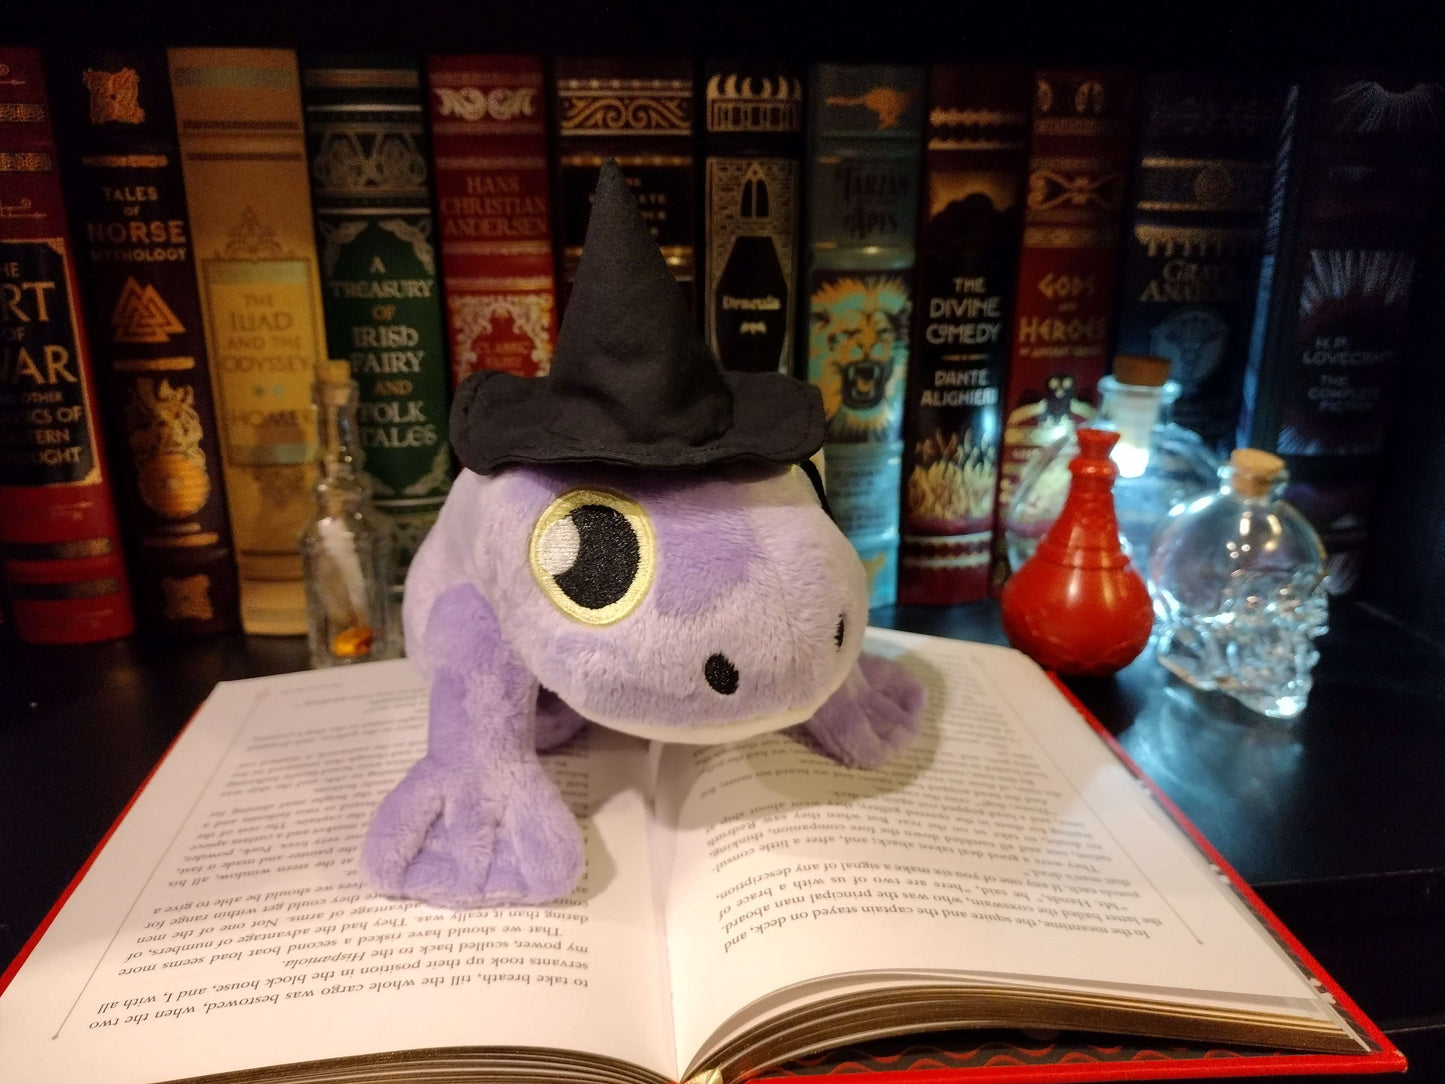 Magical frog plushies